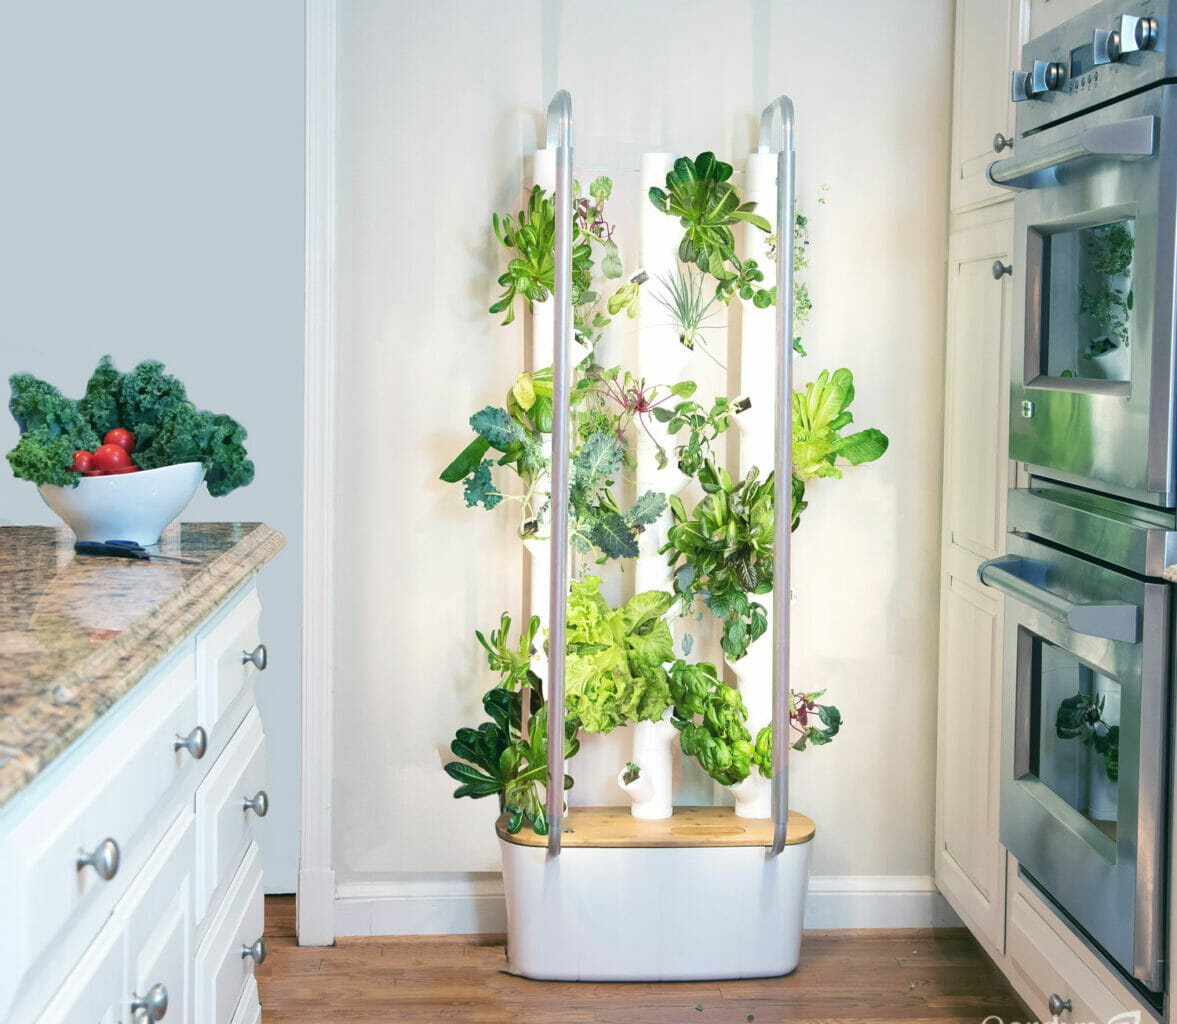 The Rise of At-Home Hydroponic Gardens